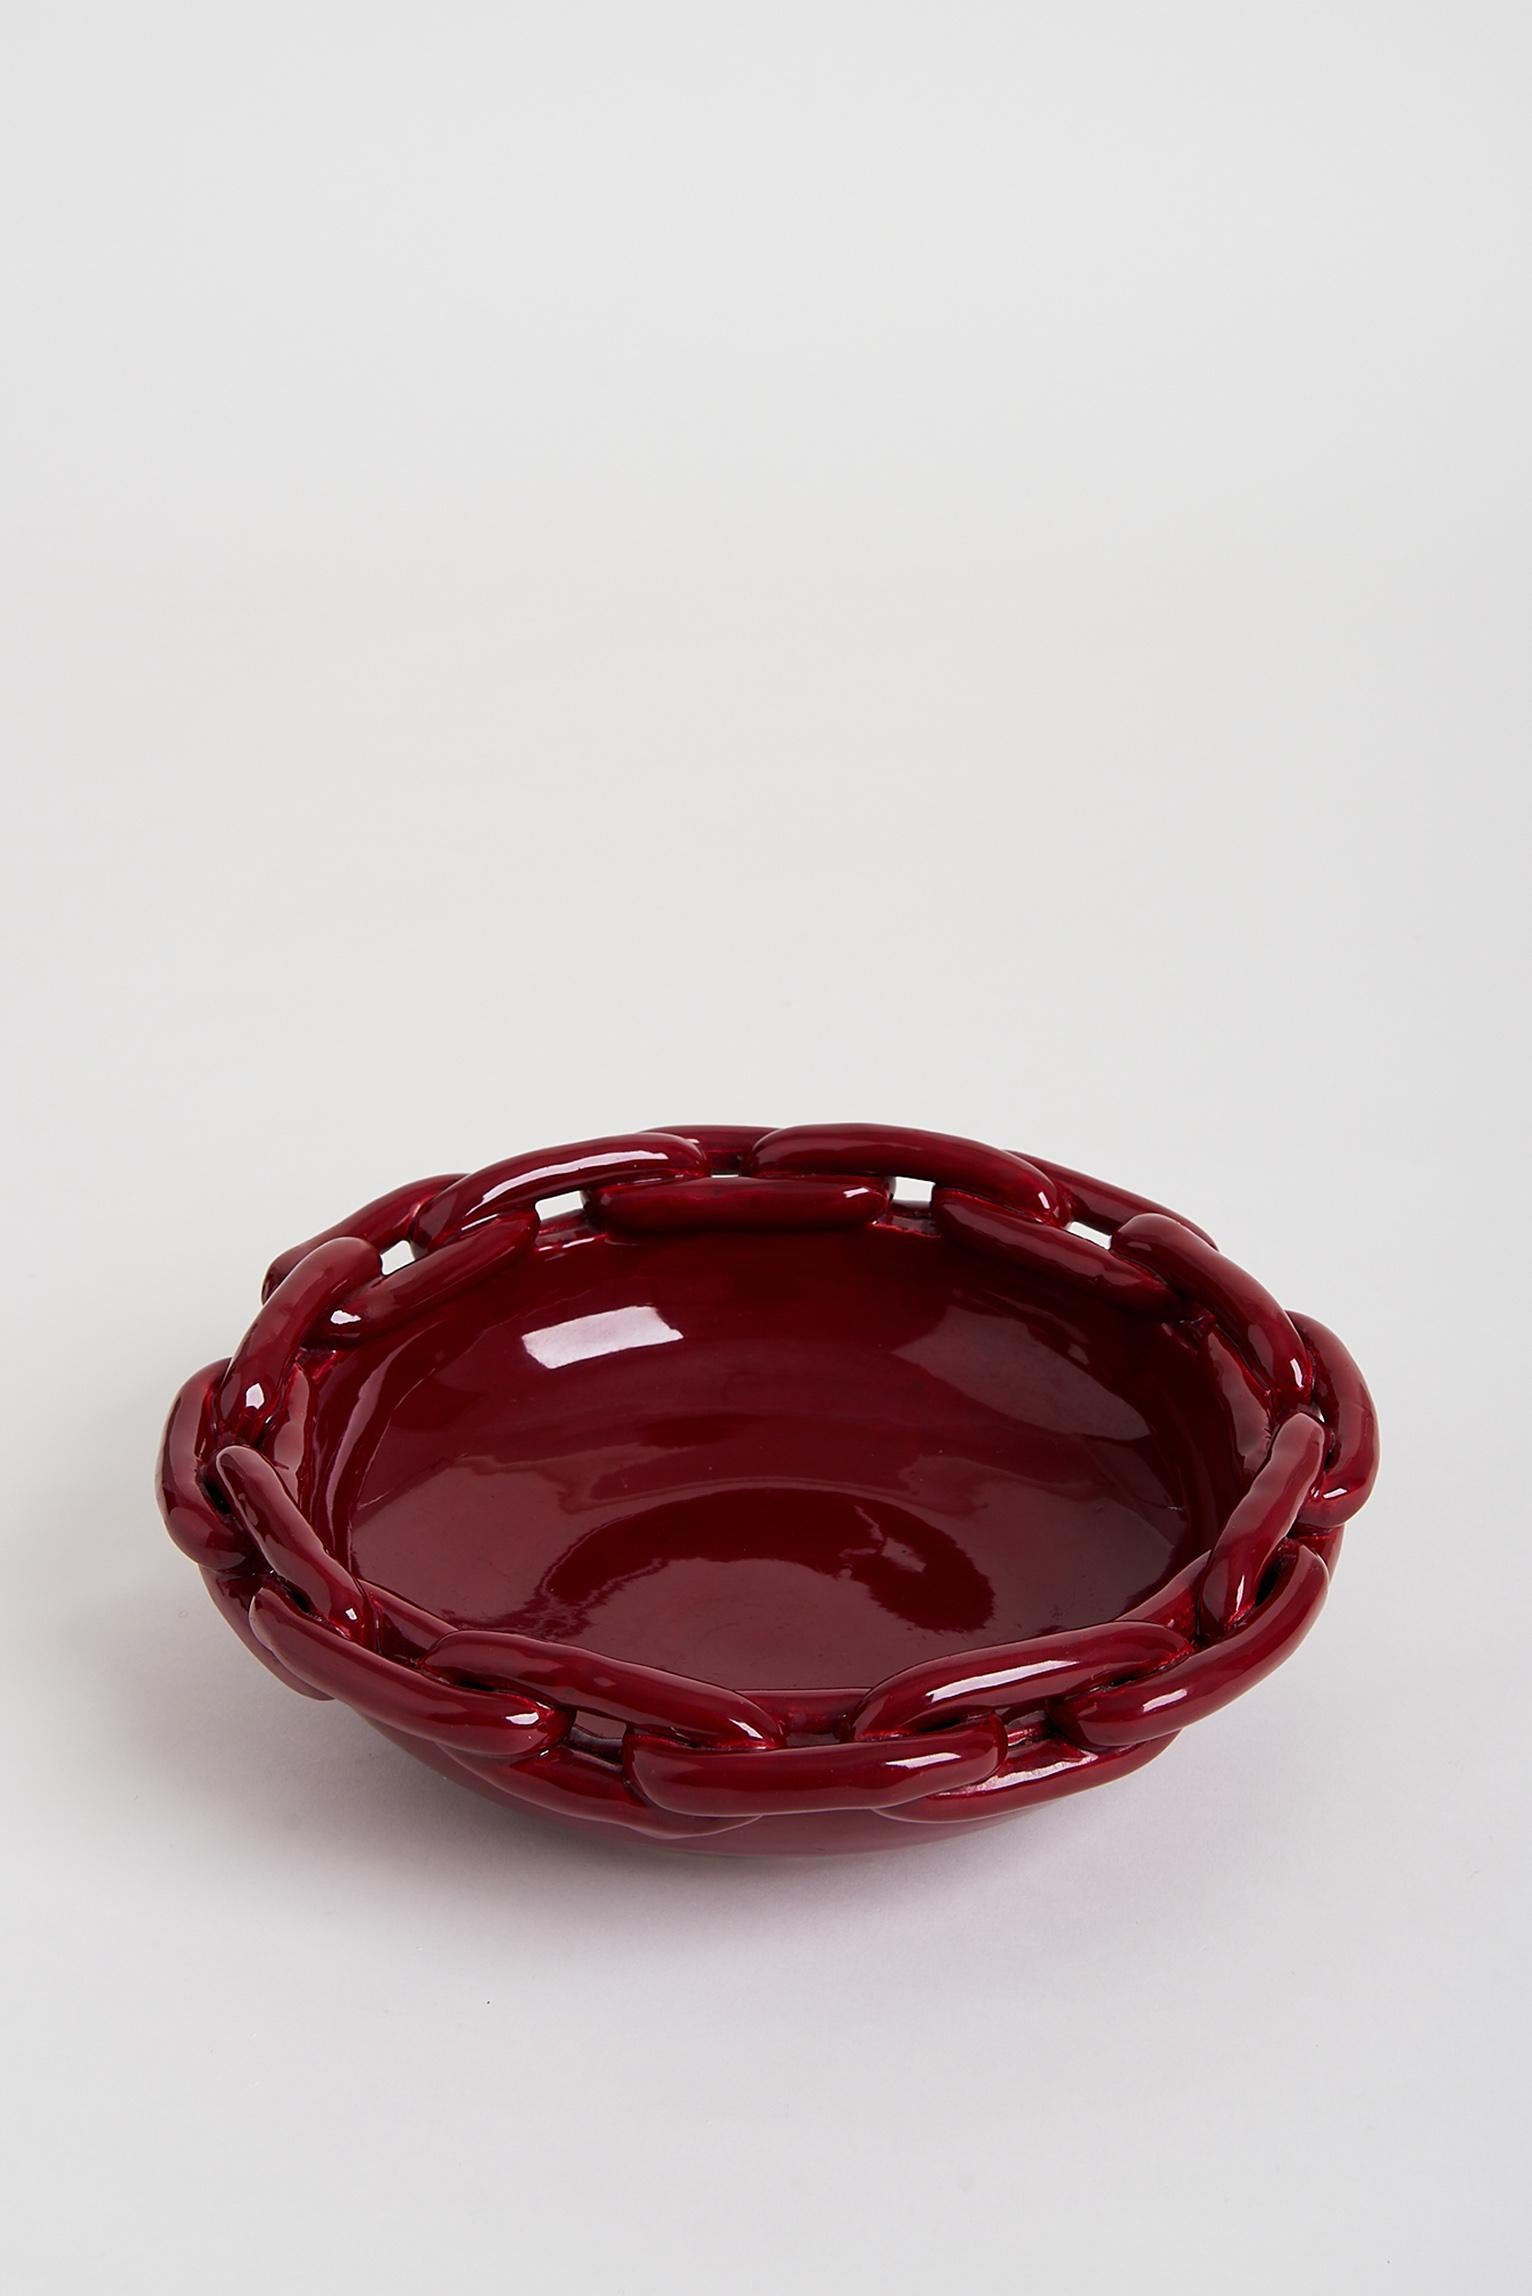 A large red glazed ceramic circular bowl, with a chain links border, attributed to Jerome Massier.
Stamped Vallauris,
France, circa 1950.